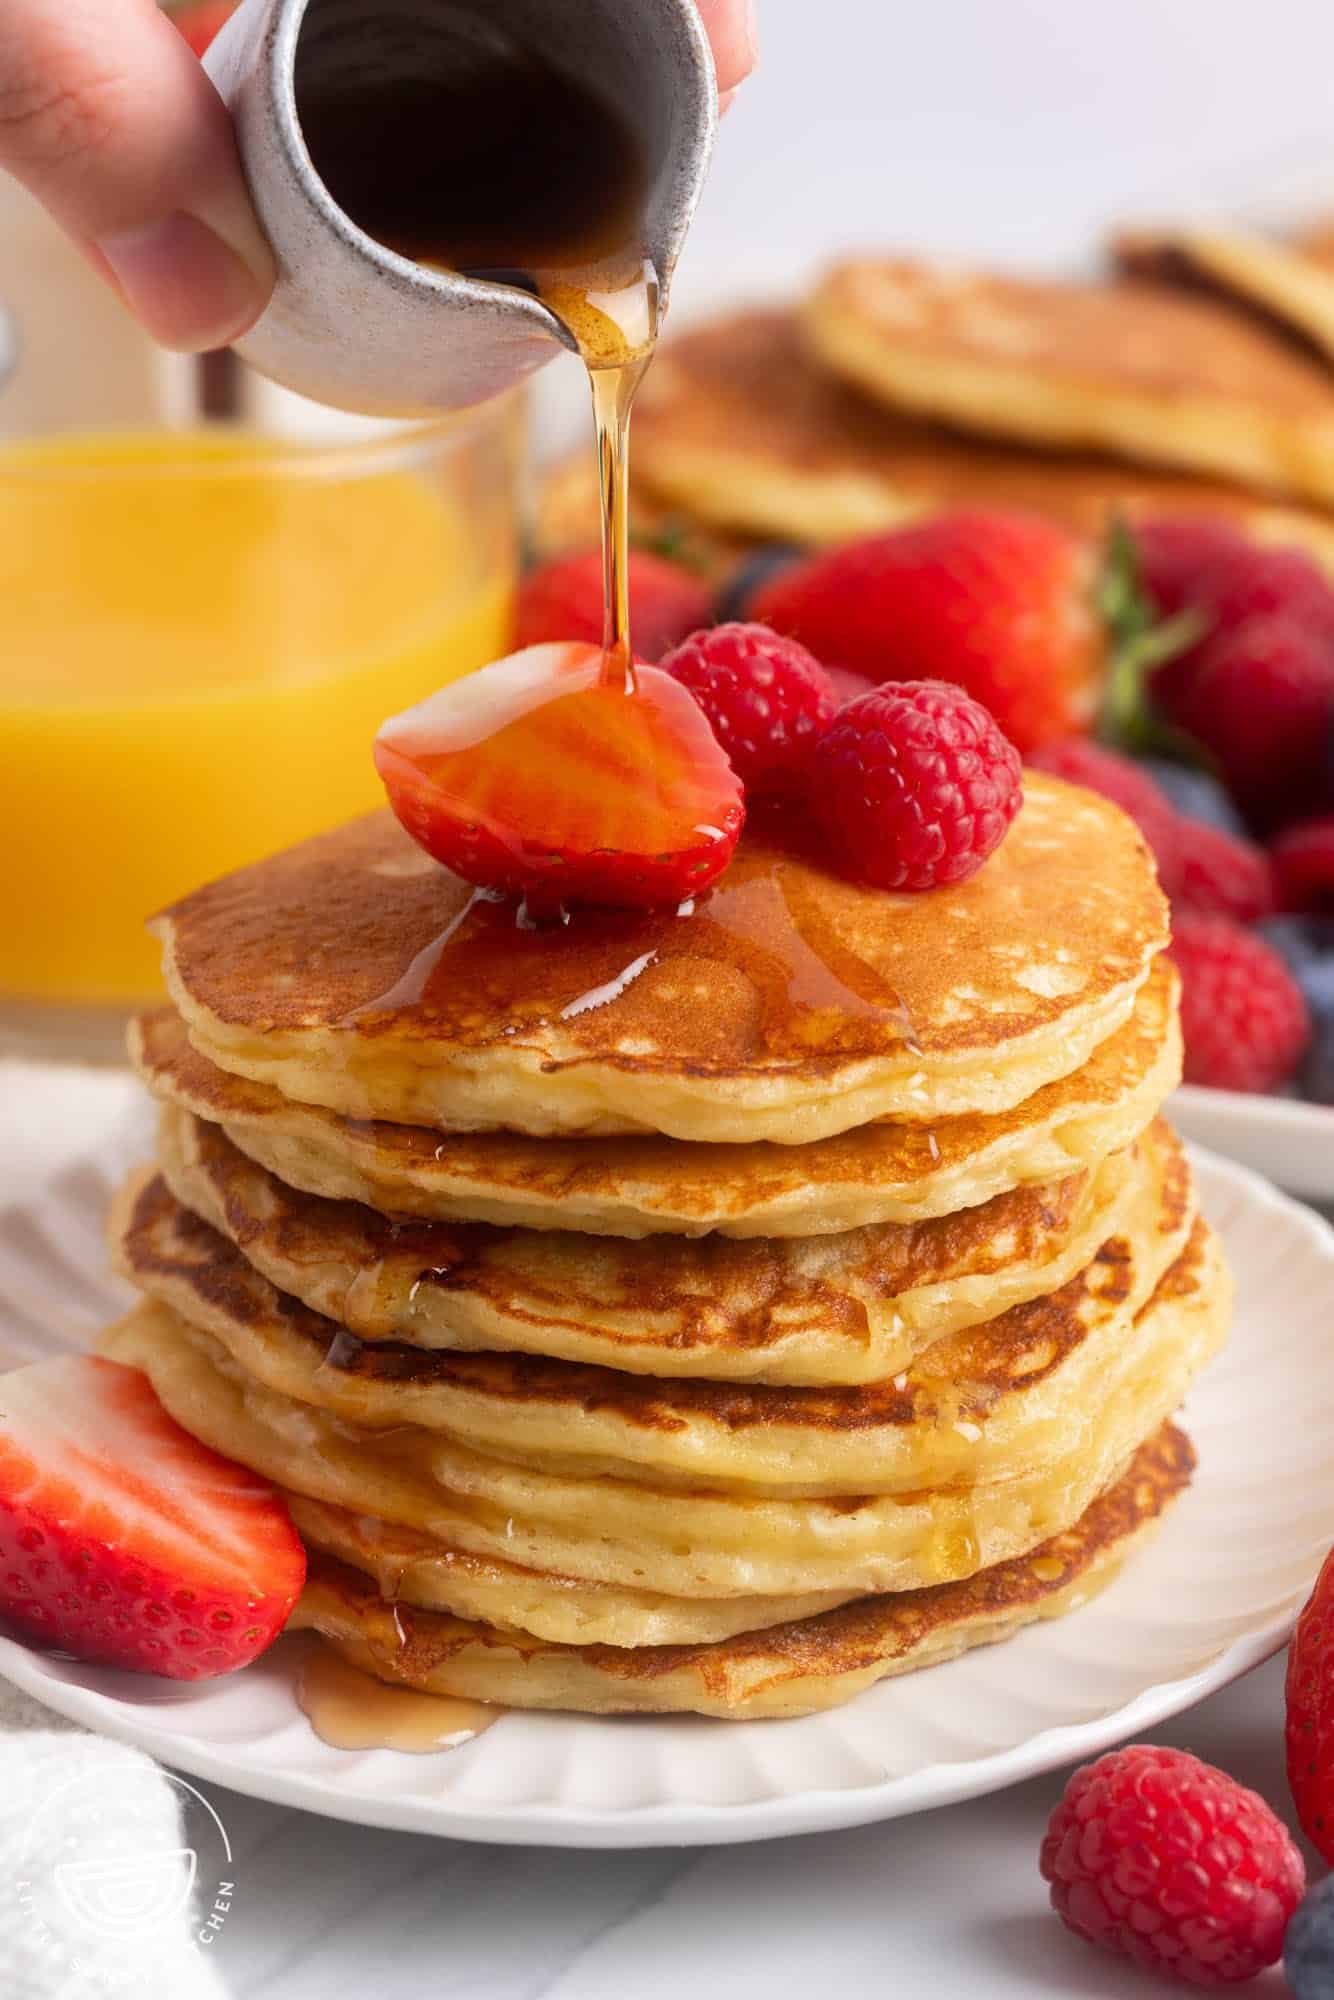 A stack of pancakes with cottage cheese, topped with fresh berries. A hand is pouring maple syrup over the stack. A glass of orange juice is in the background.